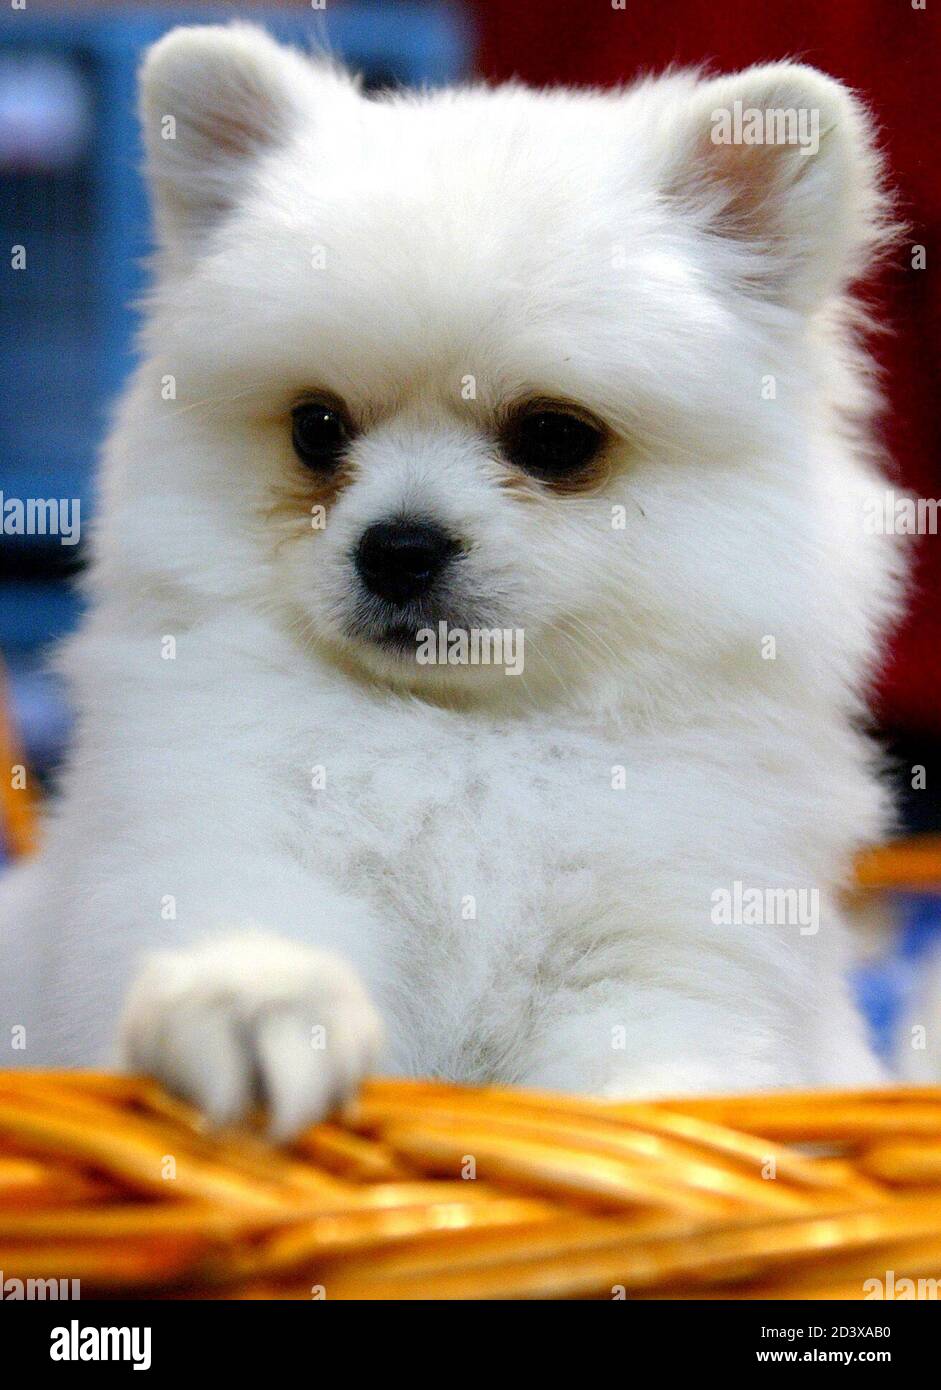 A Pomeranian puppy peeps from a basket at a Pet Festival in Shanghai March 26, 2004. Dog ownership, banned under the rule of the late Mao Zedong as a bourgeois pastime, was legalised only a few years ago as higher living standards allowed many people to afford pets, including imported breeds. REUTERS/Claro Cortes IV  CC/CP Stock Photo